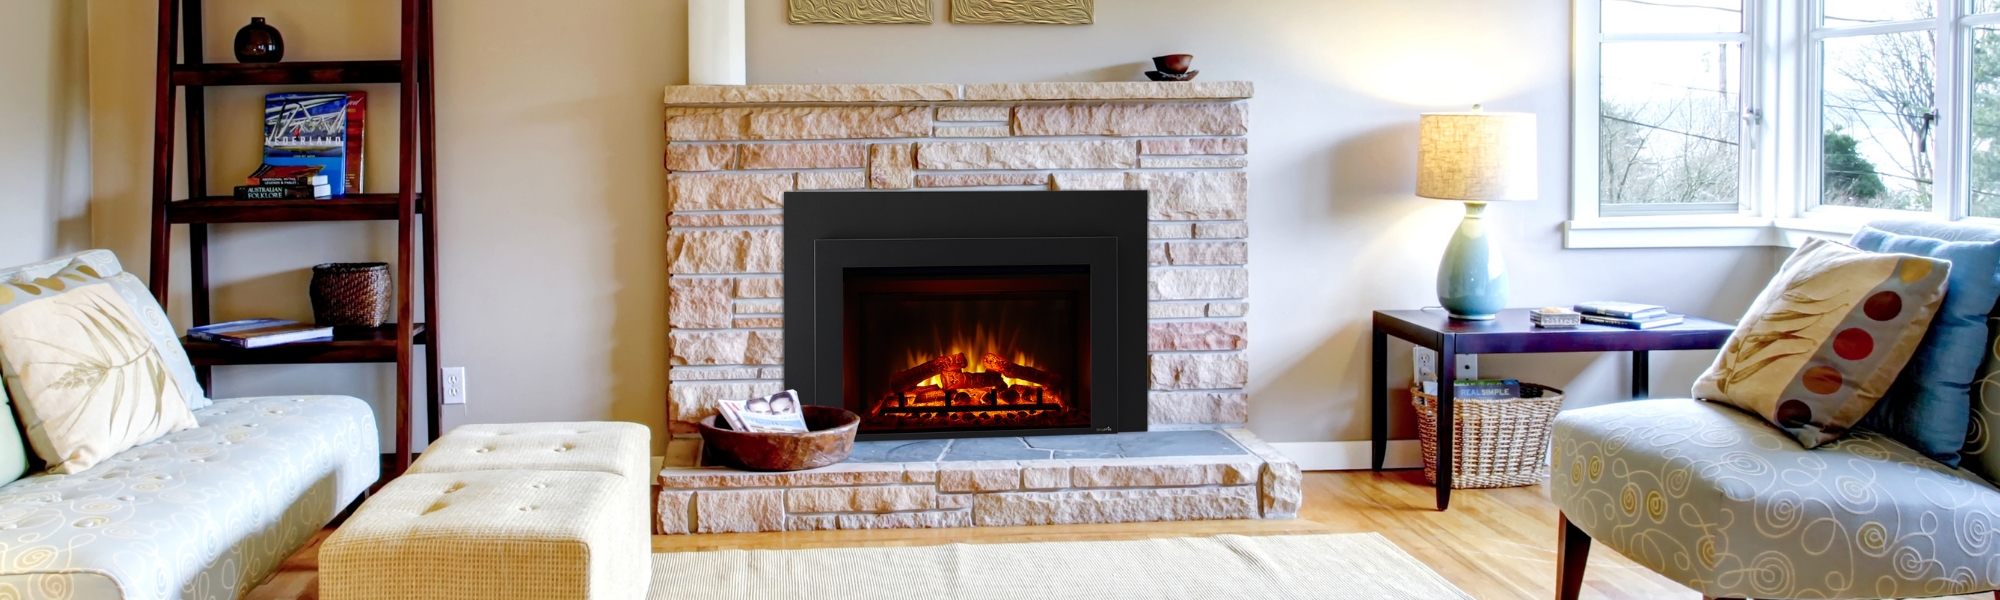 gas burning fireplace in a living room